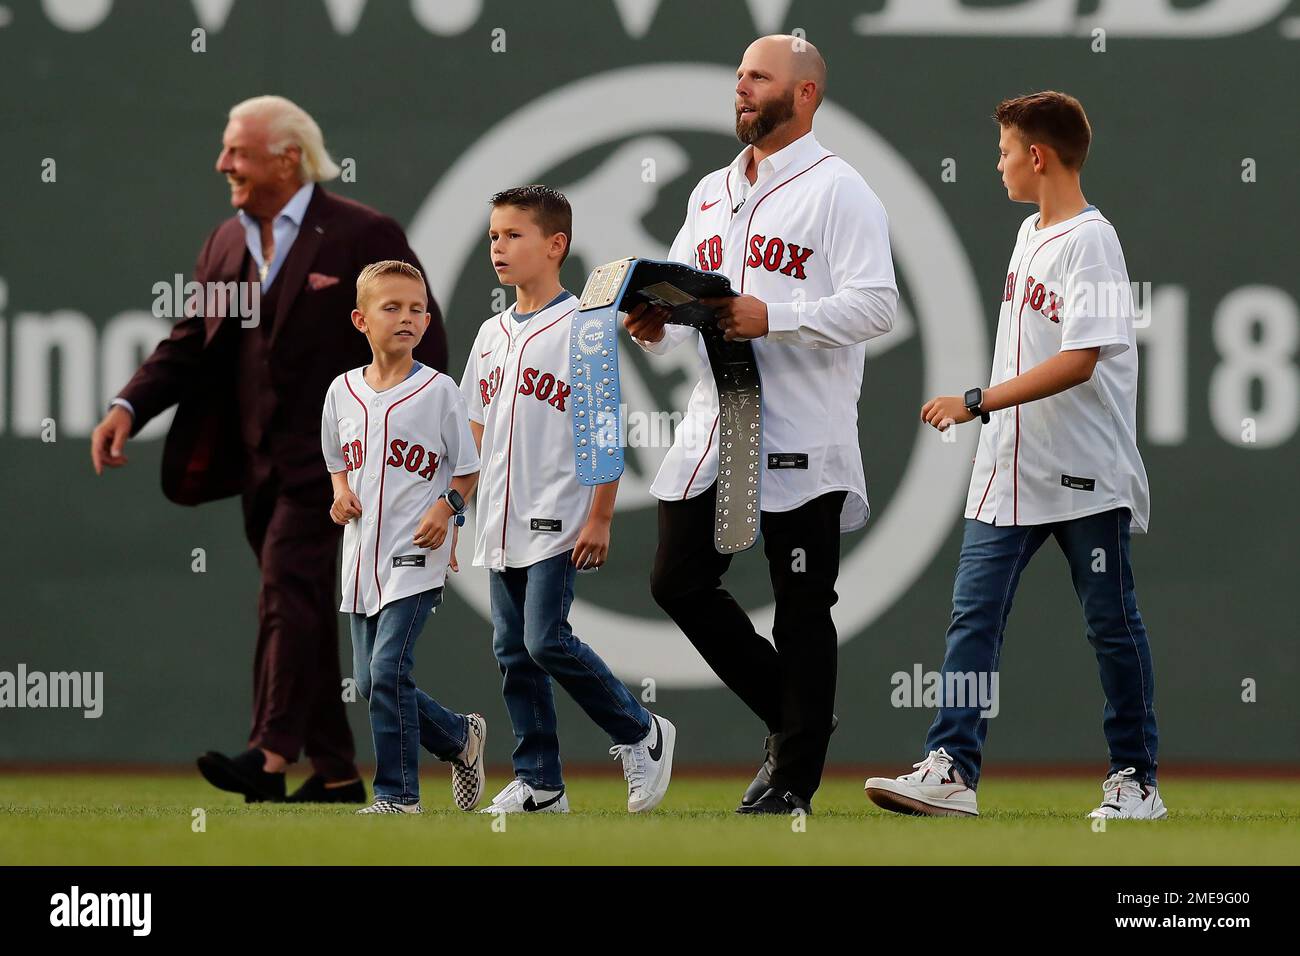 Former Boston Red Sox's Dustin Pedroia, center, addresses fans during  ceremonies in his honor before a baseball game against the New York  Yankees, Friday, June 25, 2021, in Boston. (AP Photo/Michael Dwyer